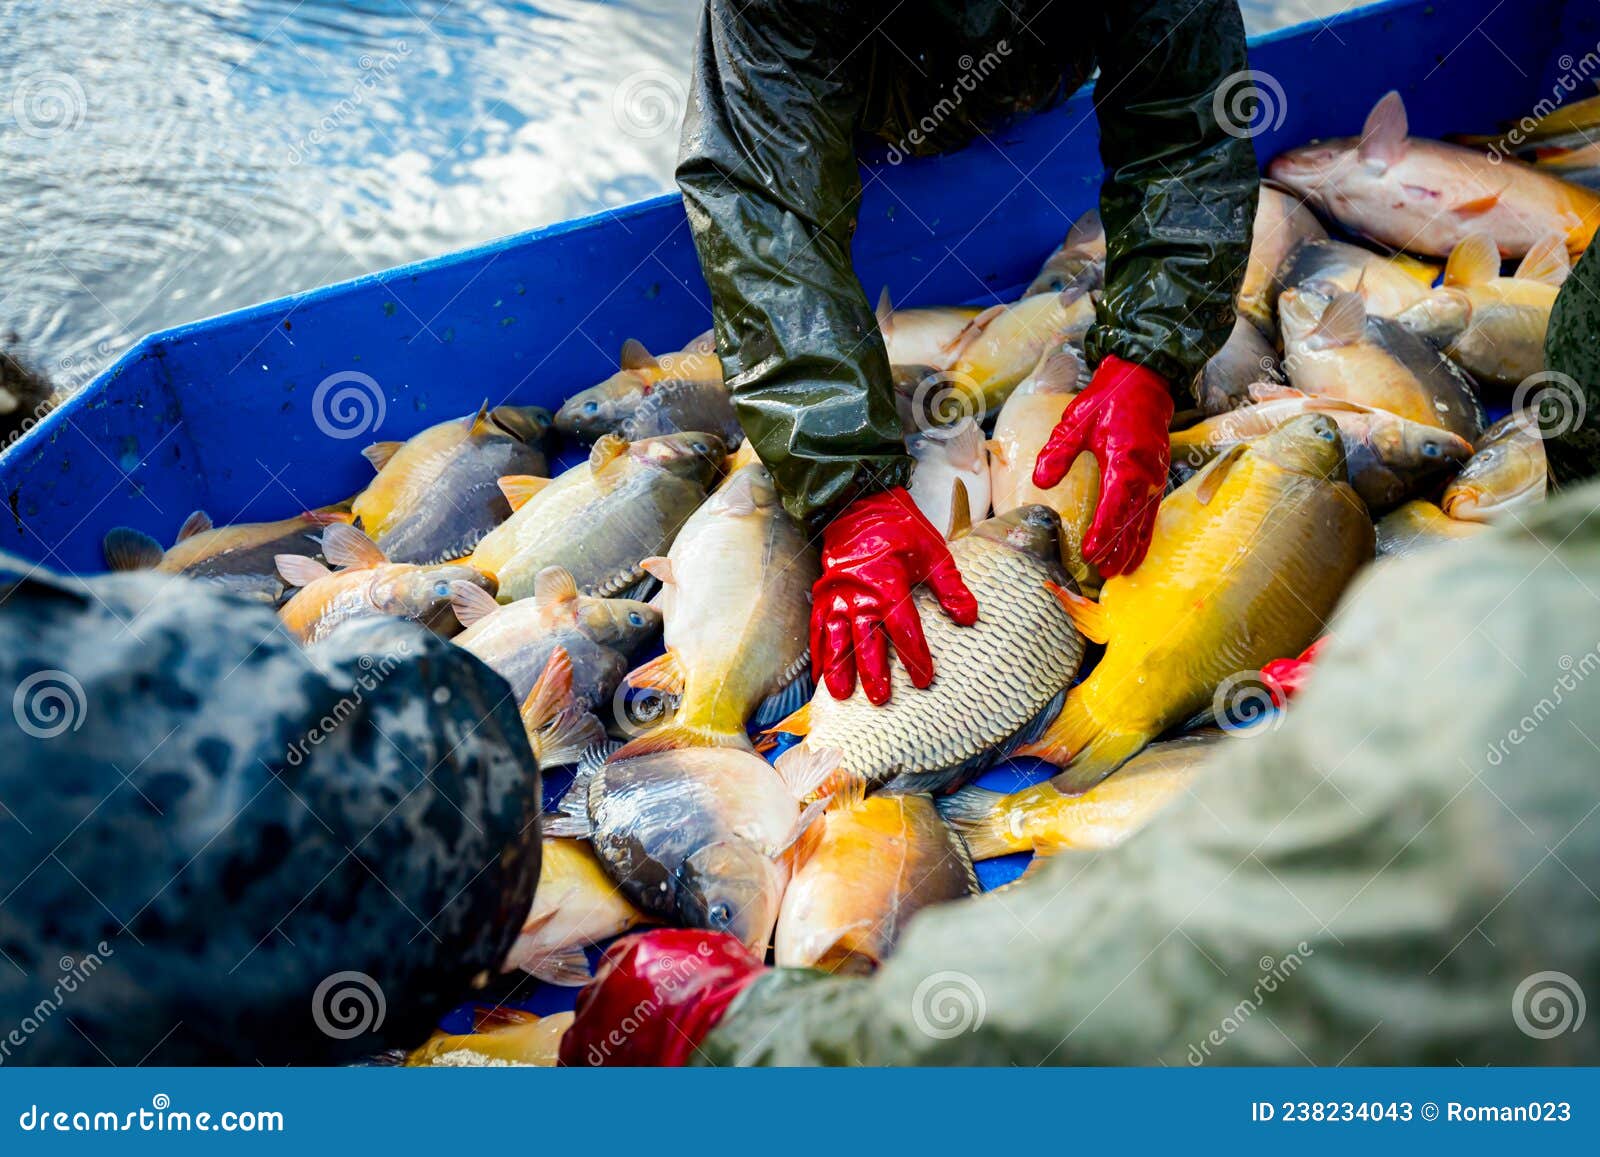 Fishermen in Waterproof Overalls Sorting Fish from Fishpond, Harvest at  Fish Farm Stock Image - Image of heap, harvest: 238234043